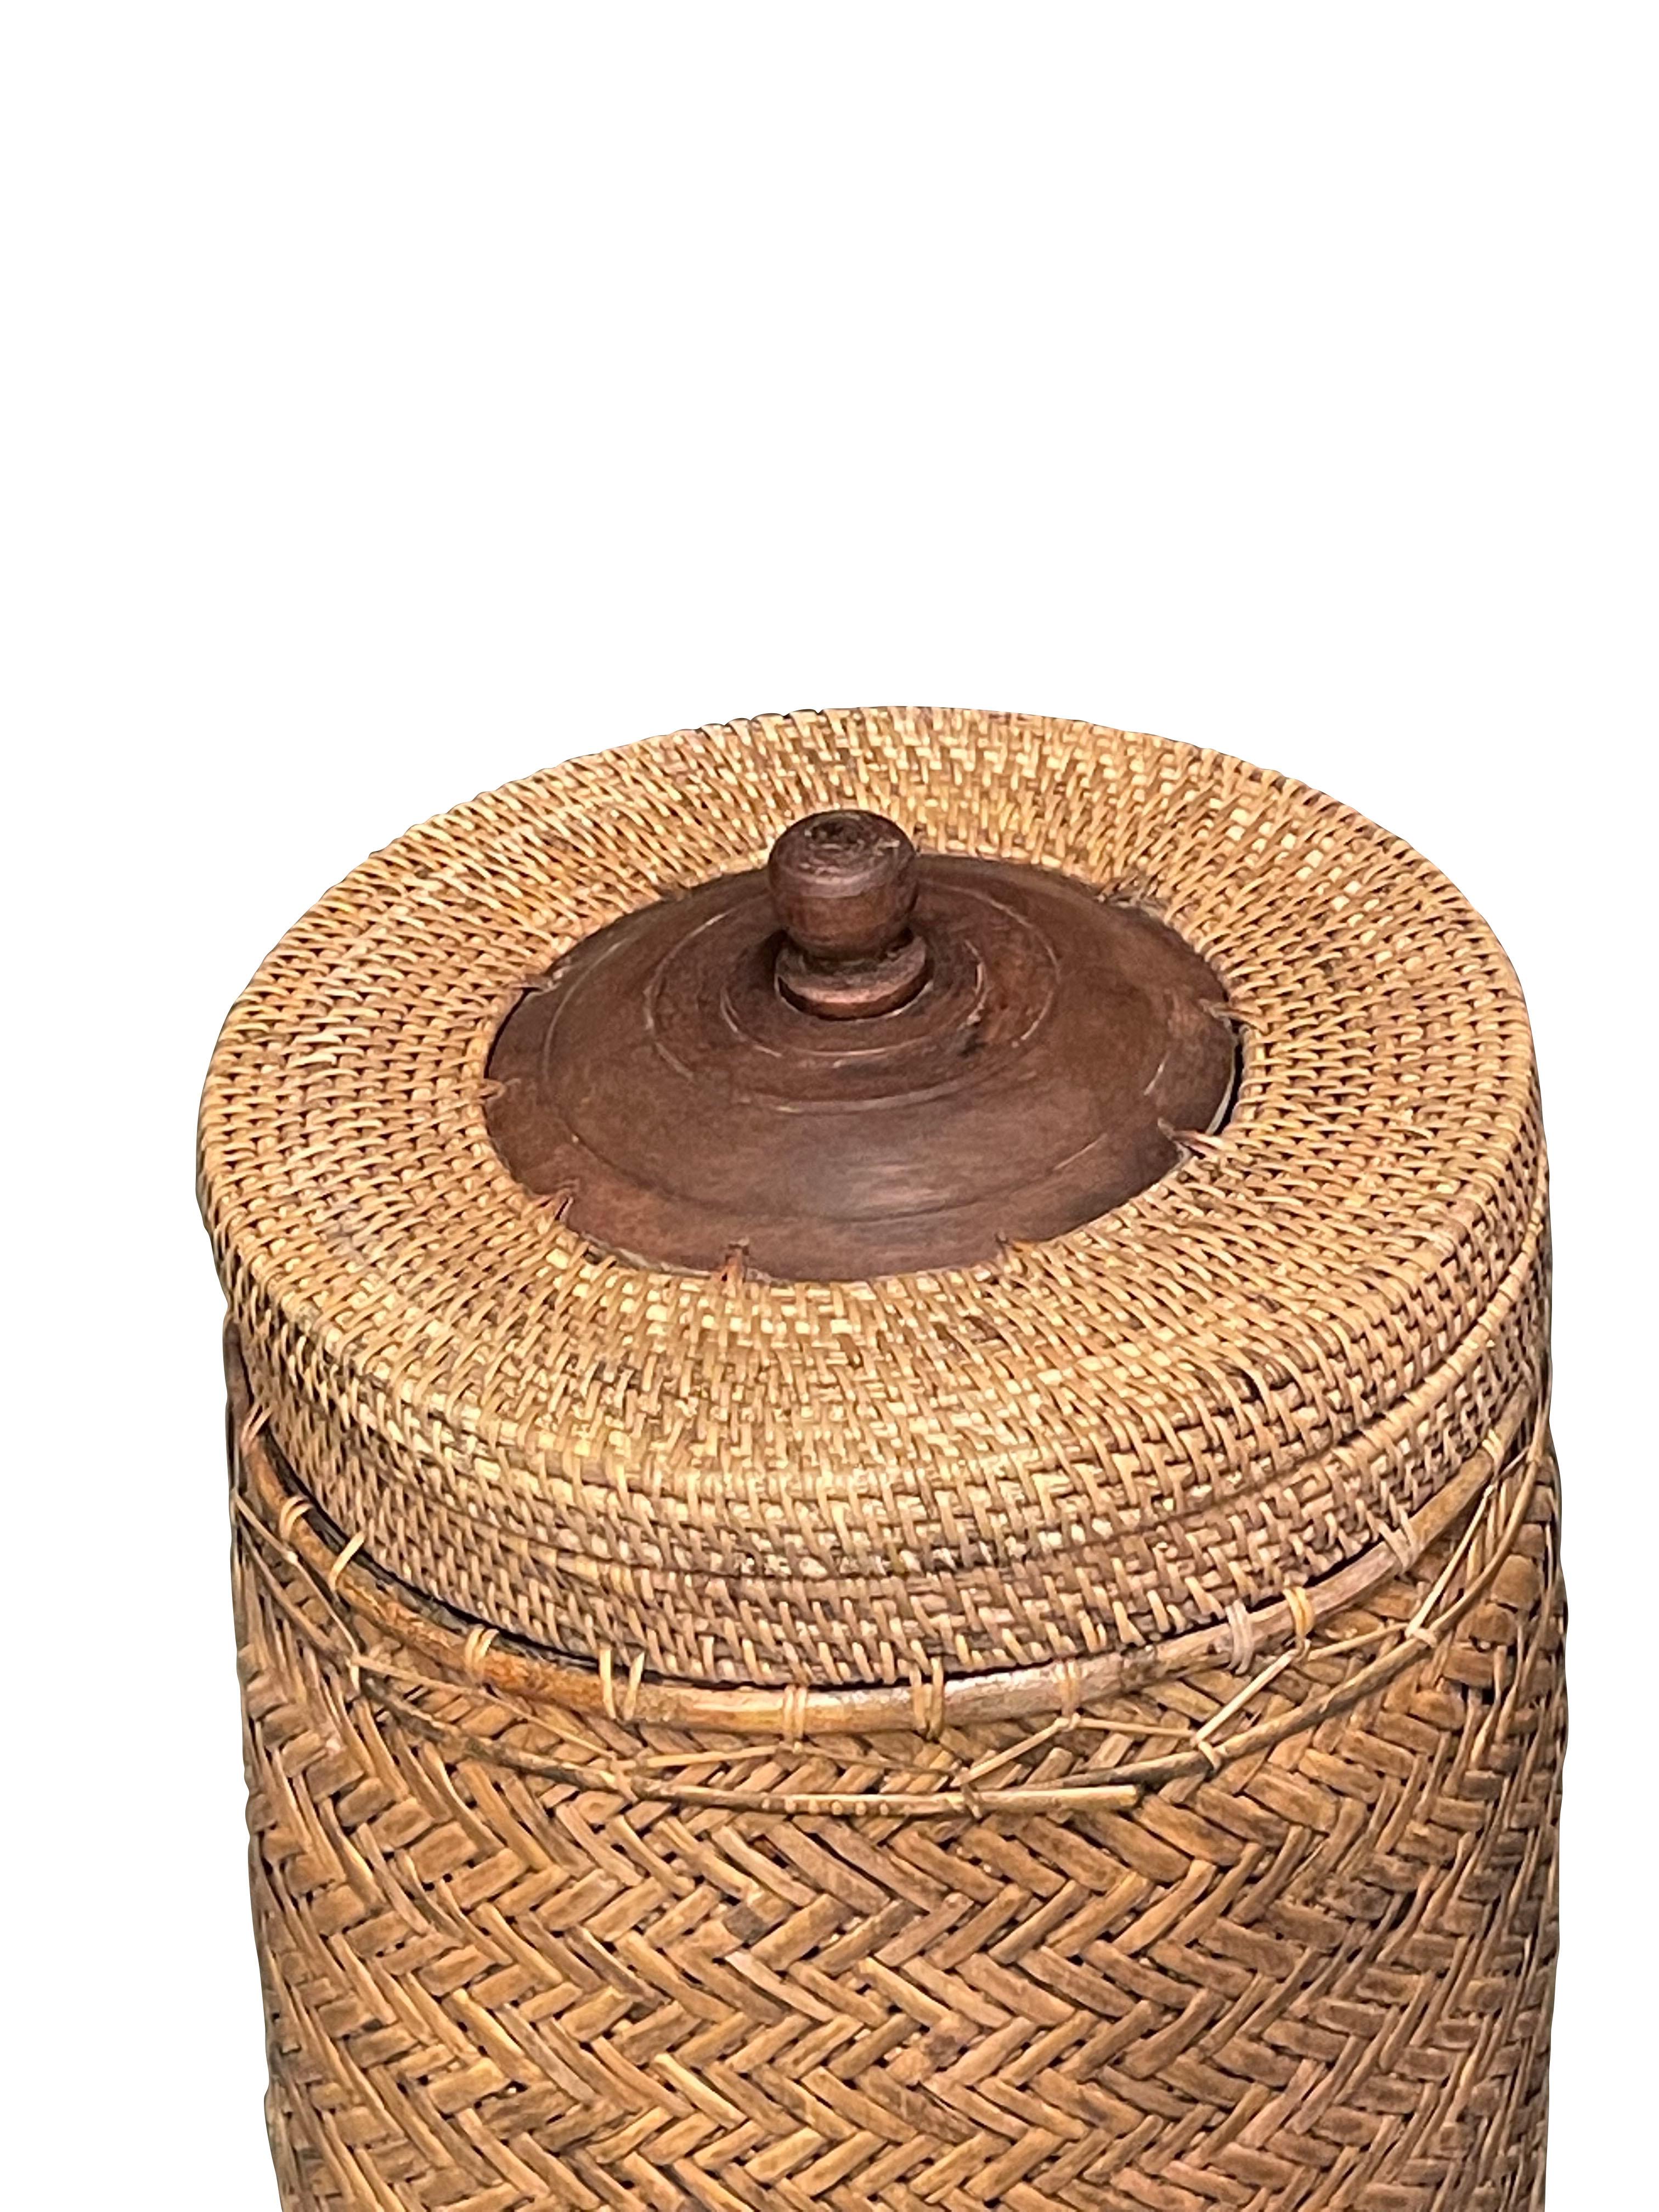 Contemporary Indonesian tall woven wicker lidded basket.
Chevron pattern on body and alternate design on top.
Metal pull knob.
Basket sits on square wooden base for support.

